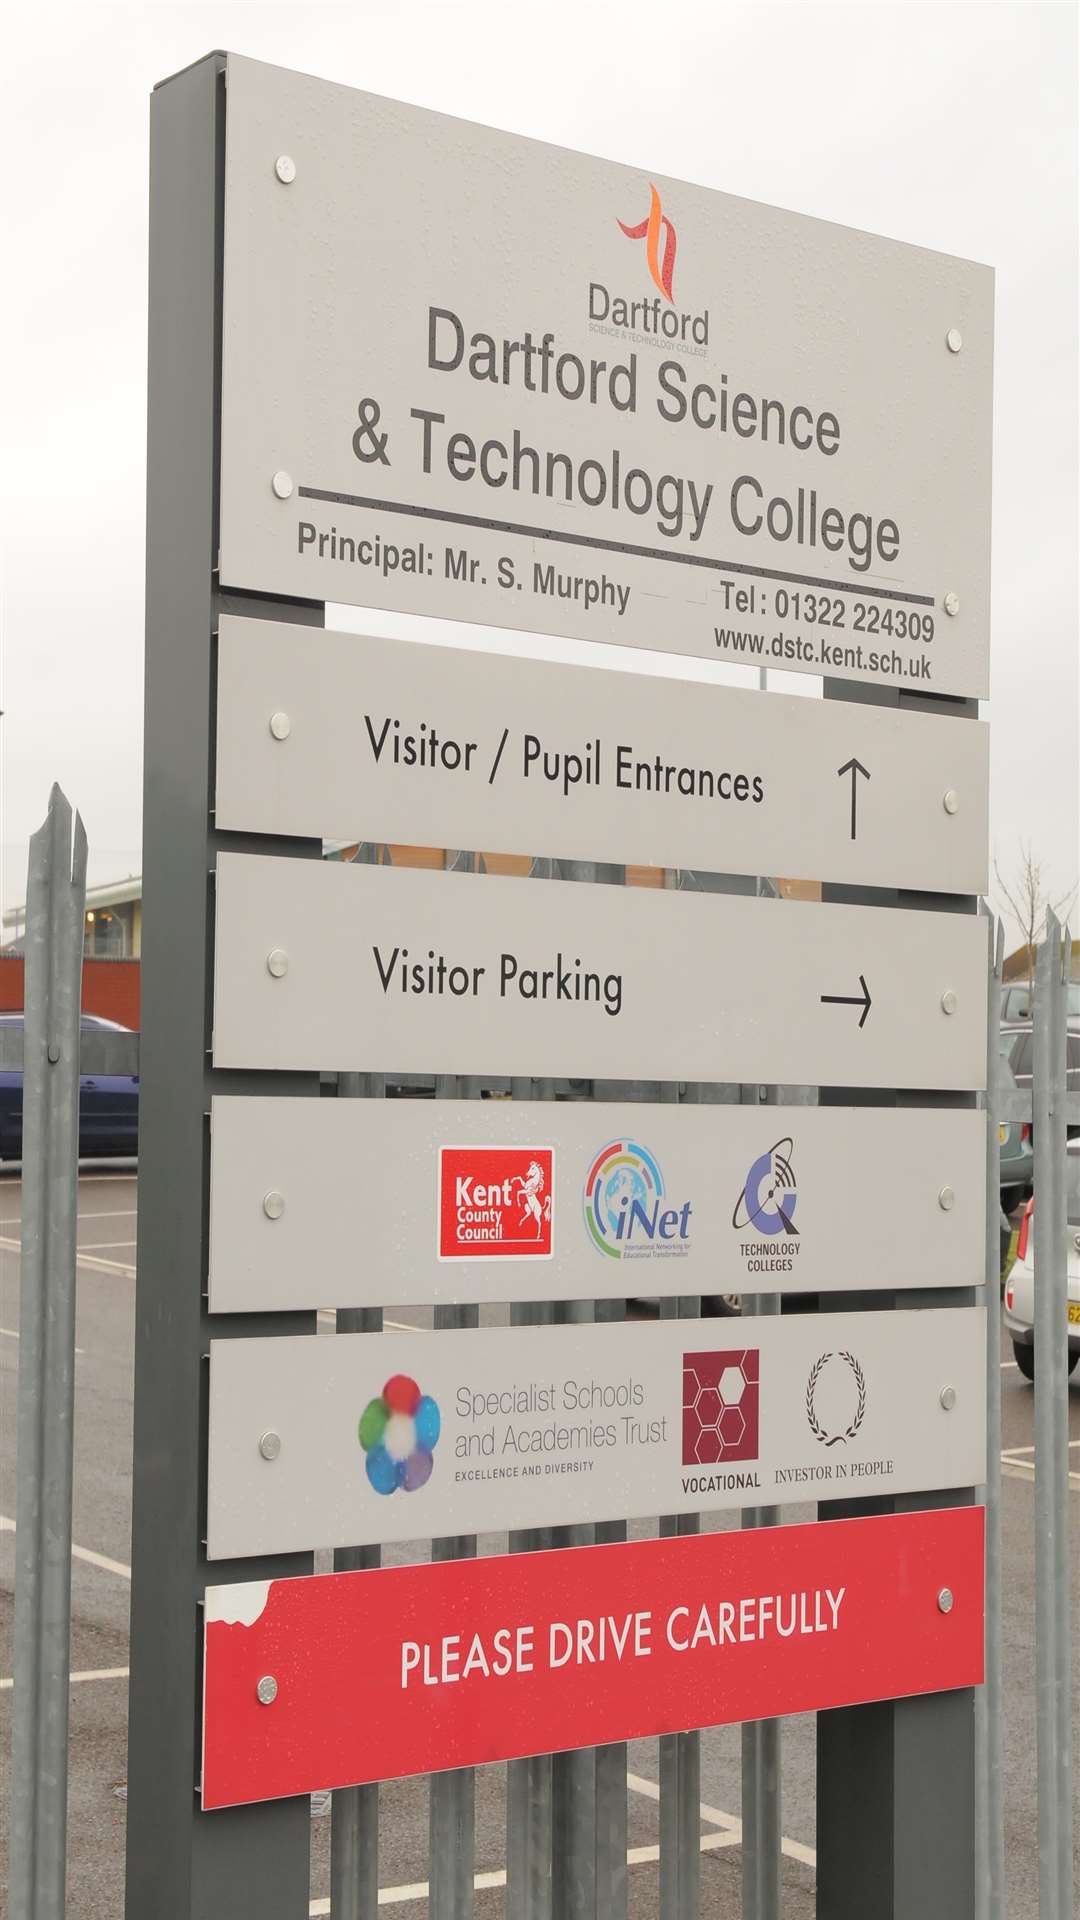 Dartford Science and Technology College